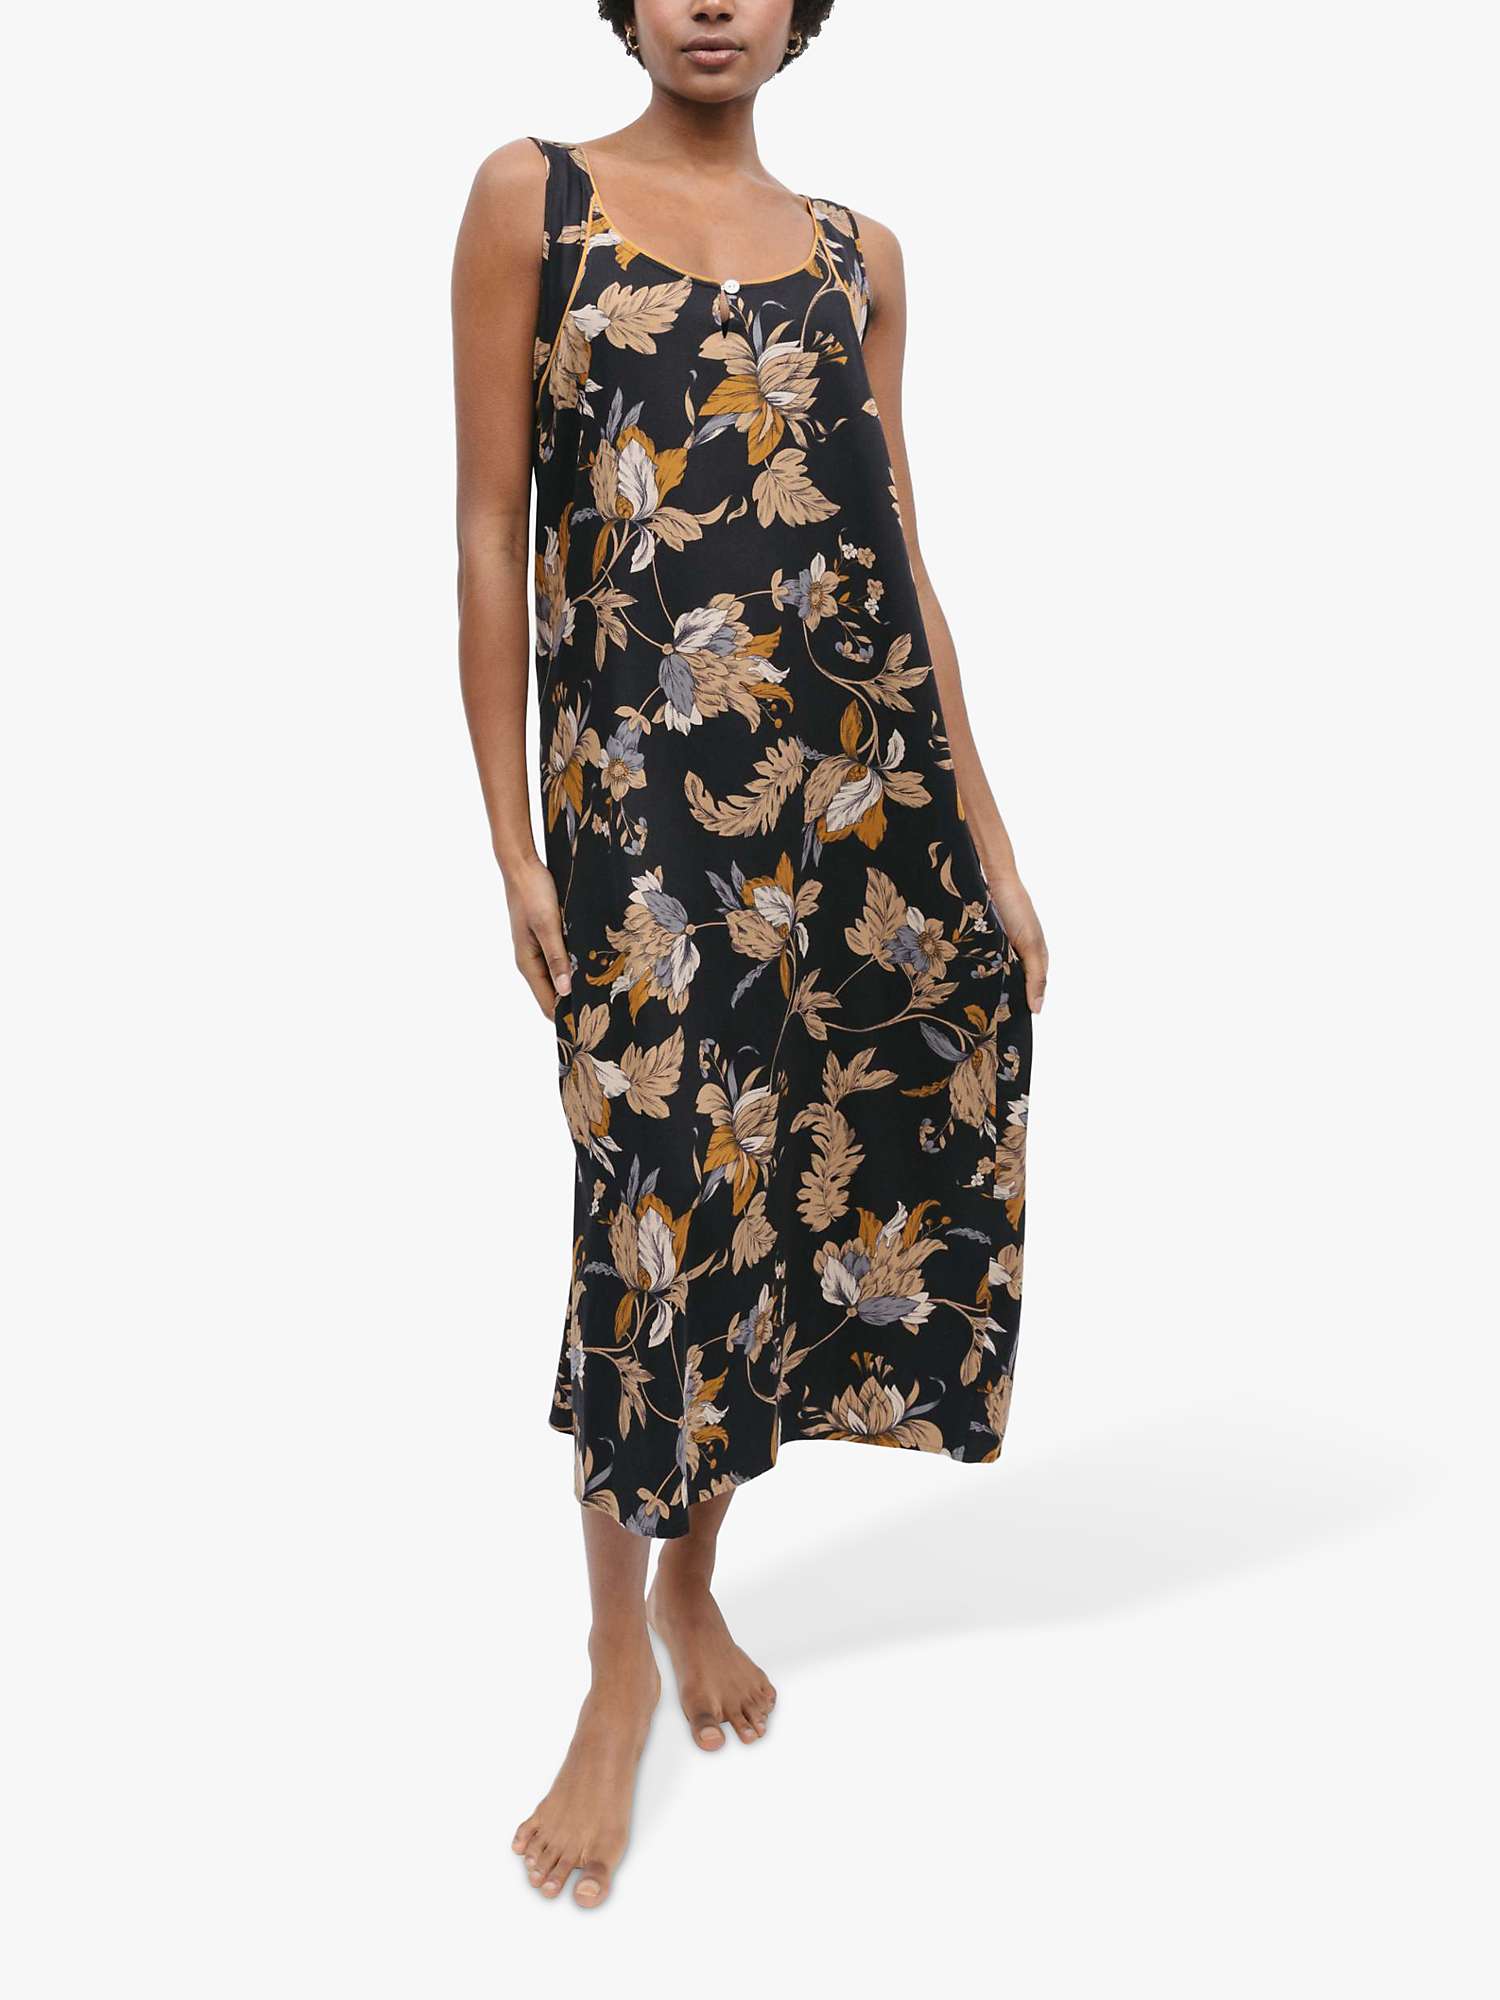 Buy Fable & Eve Brixton Floral Print Long Nightdress, Black/Multi Online at johnlewis.com